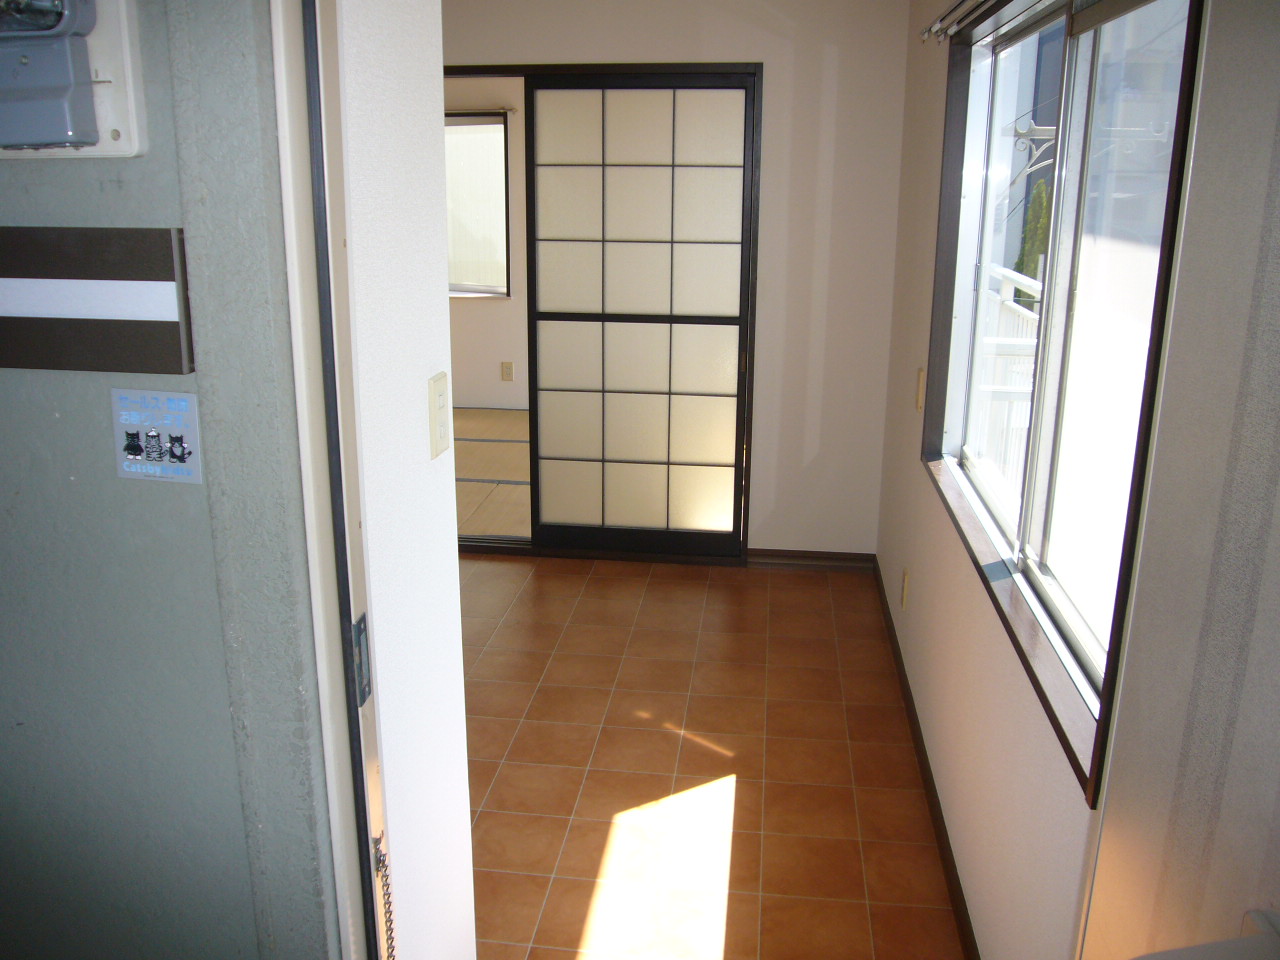 Entrance. Although kitchen and enter the entrance, There is also, then insert a positive window! !